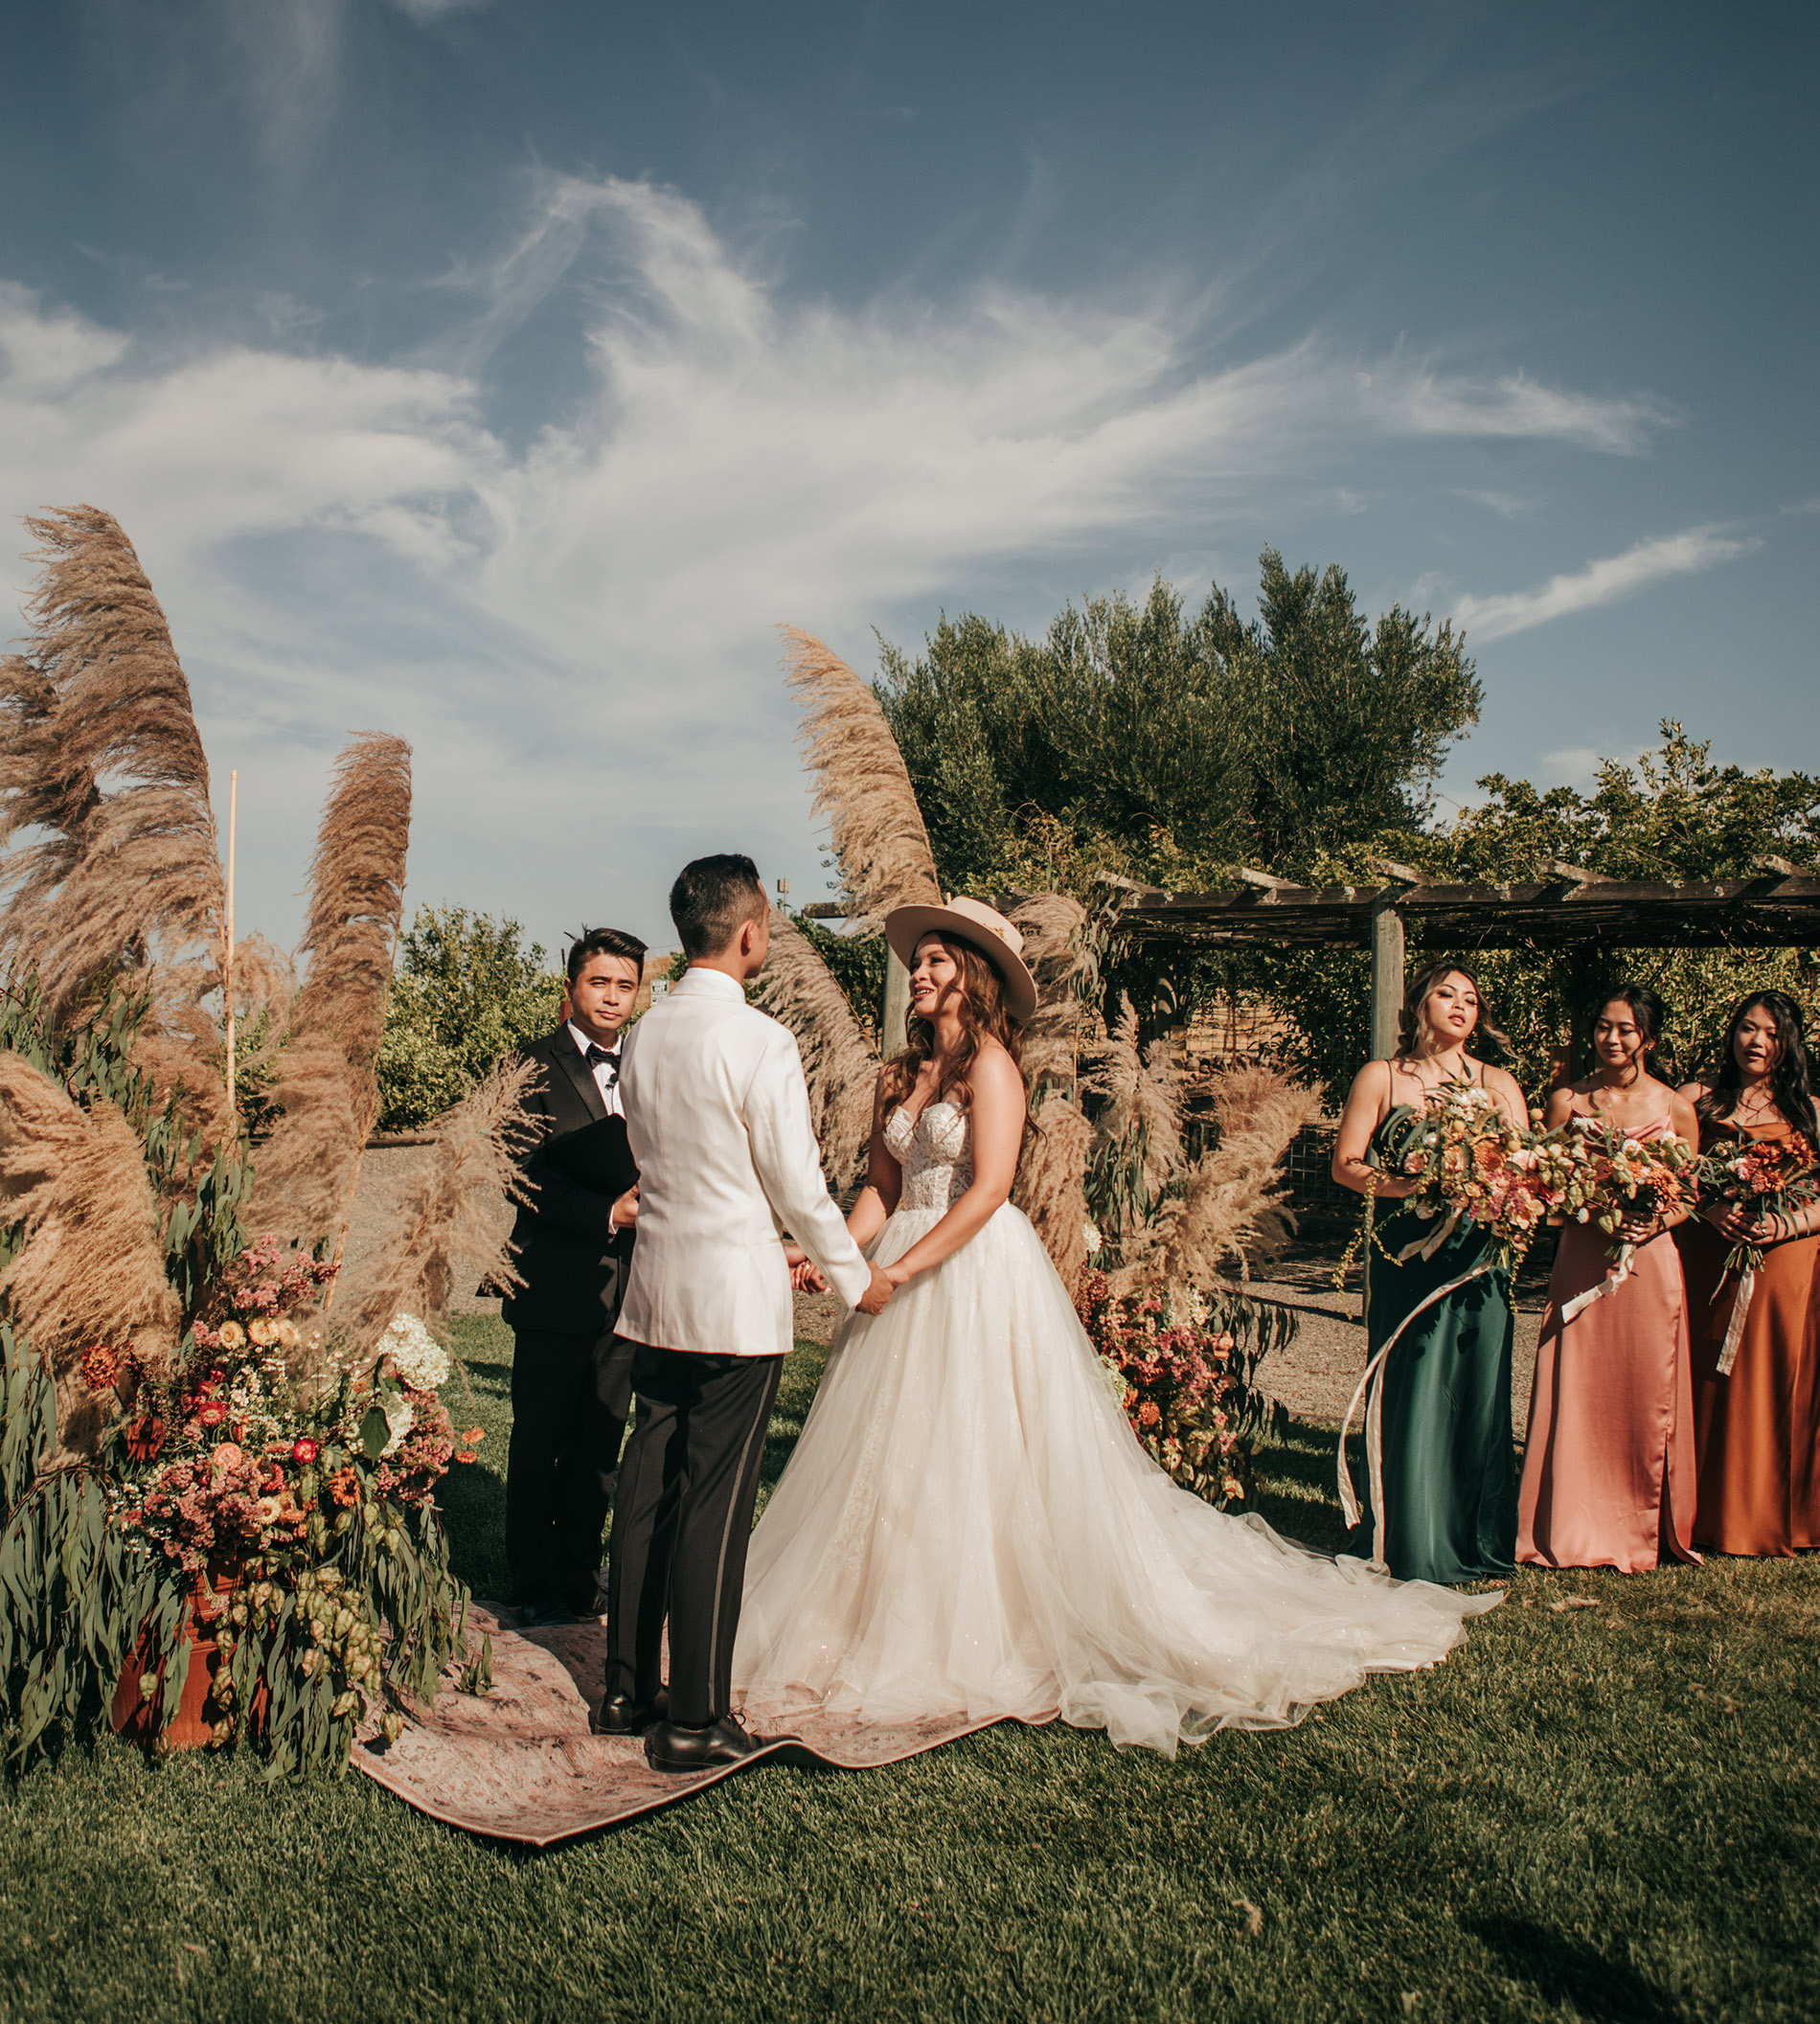 wedding ceremony space with pampas grass